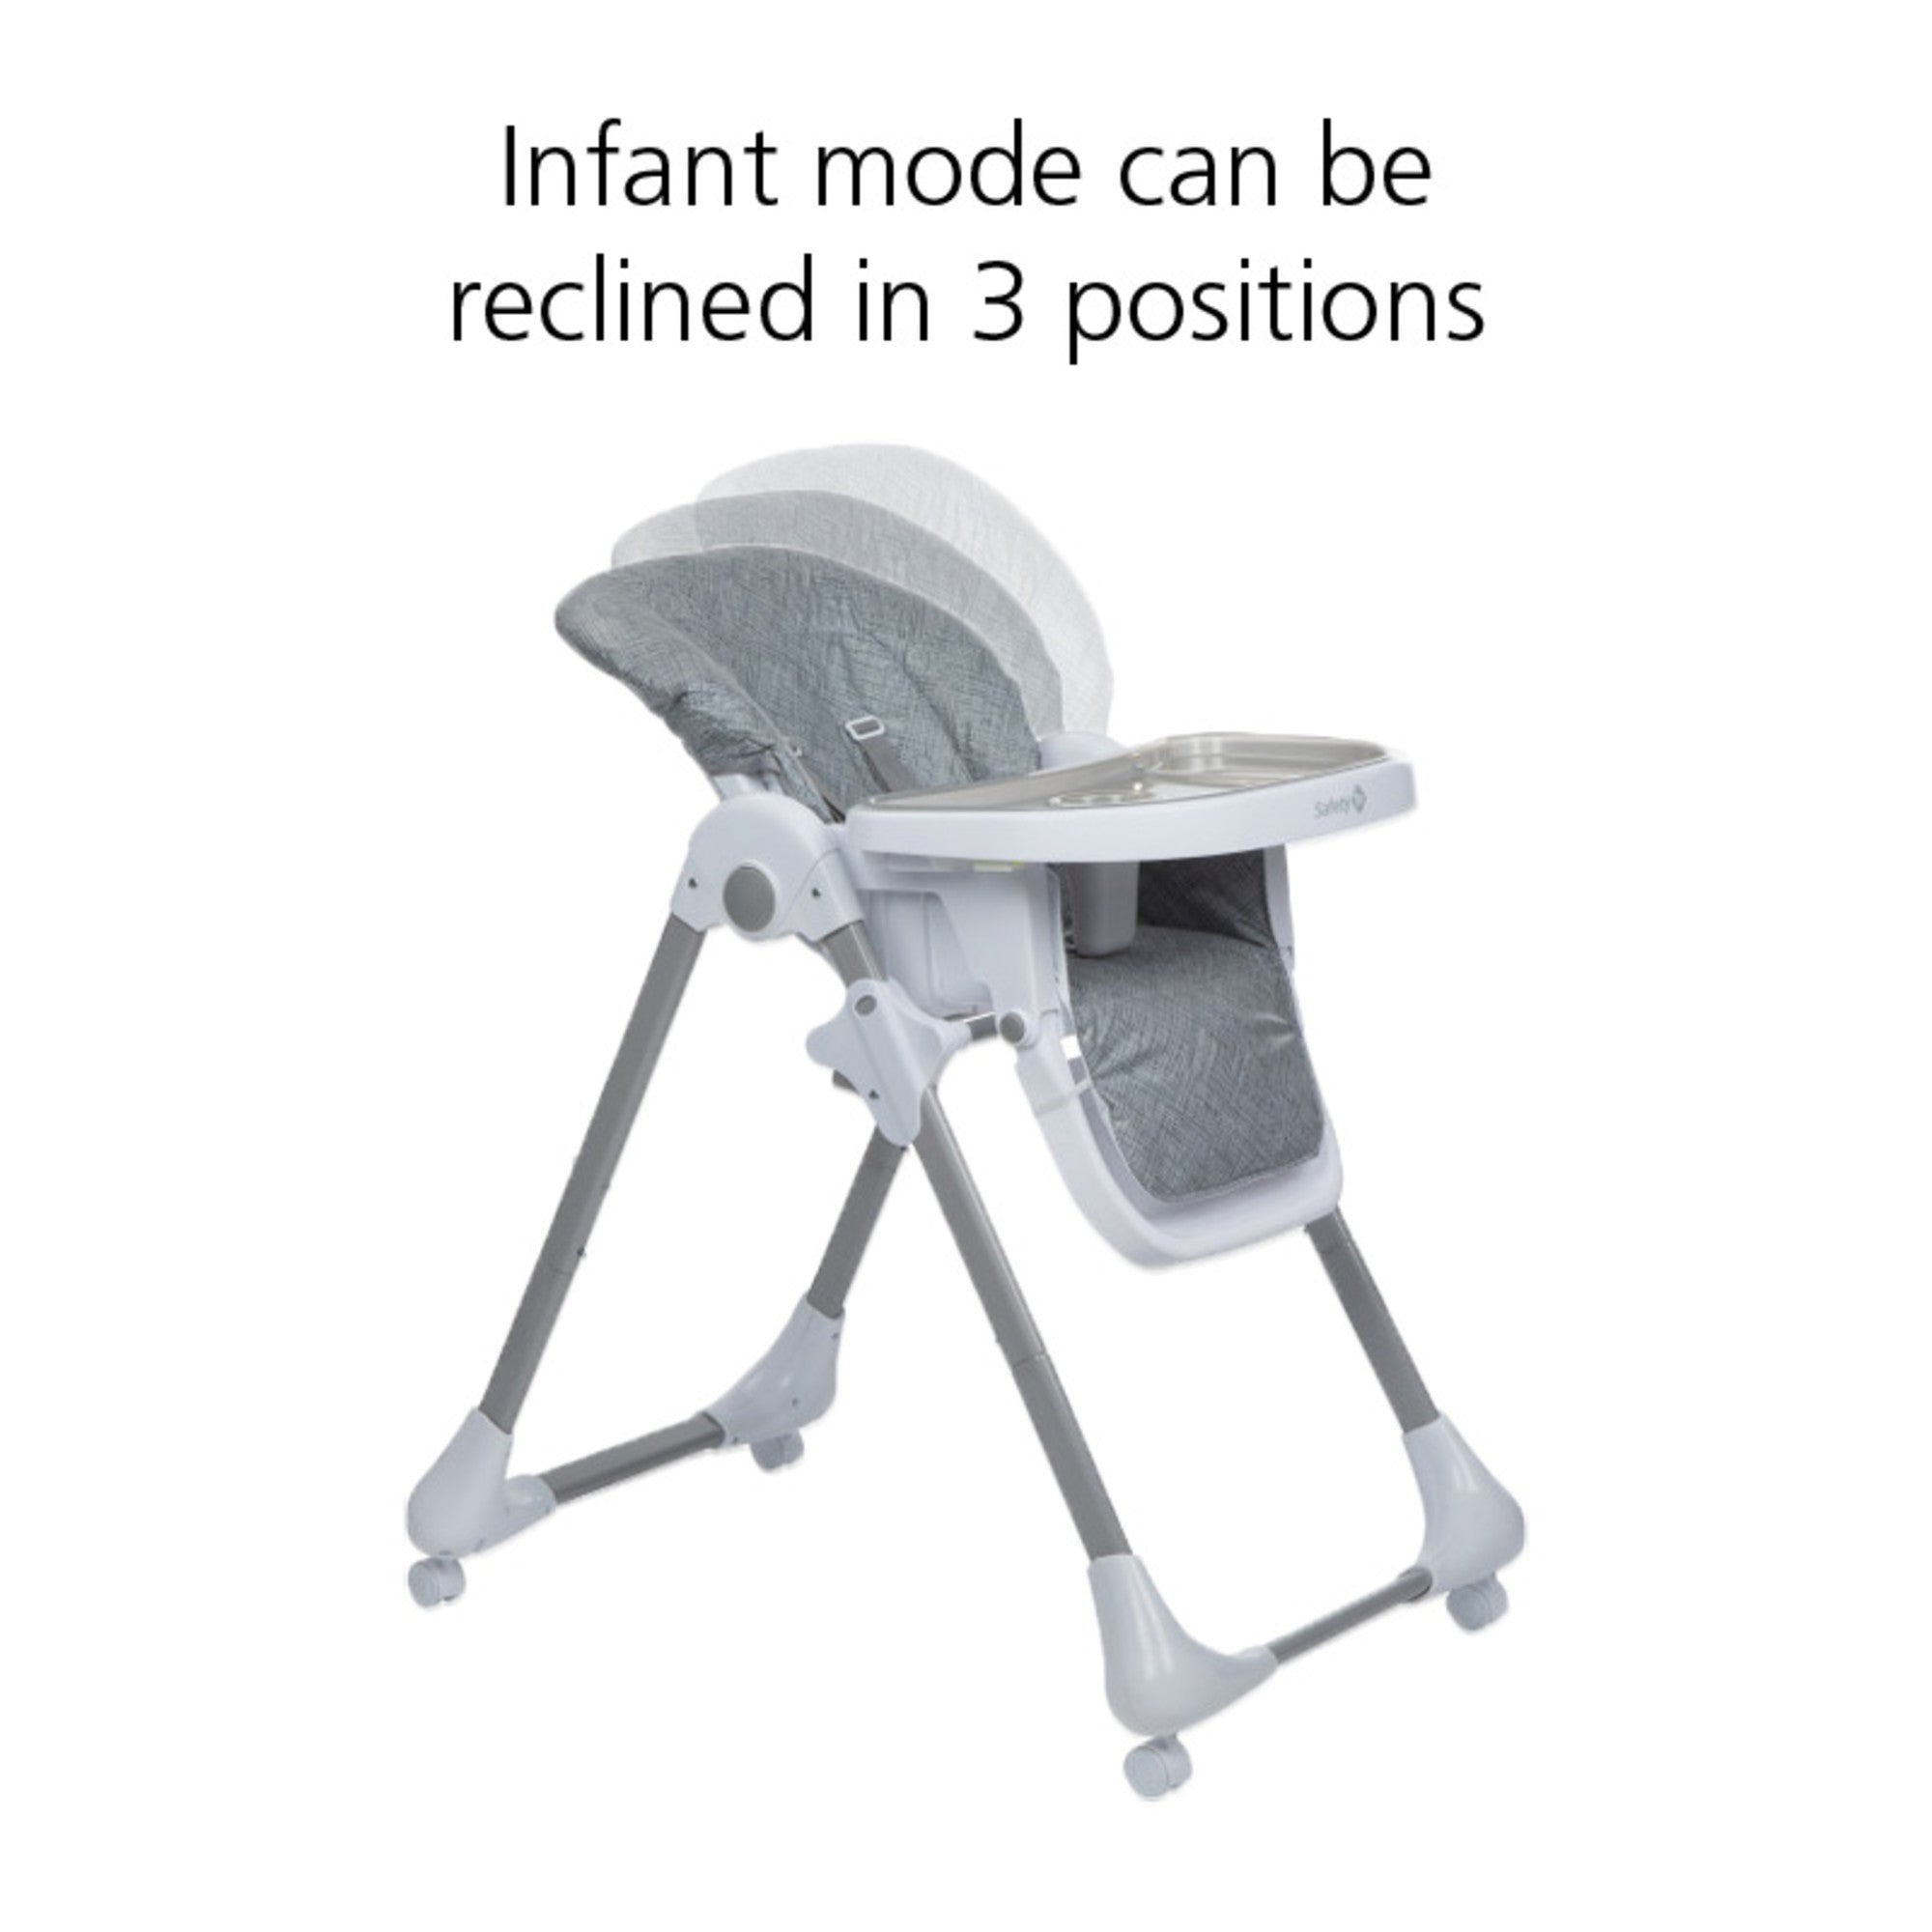 Infant mode can be reclined in 3 positions